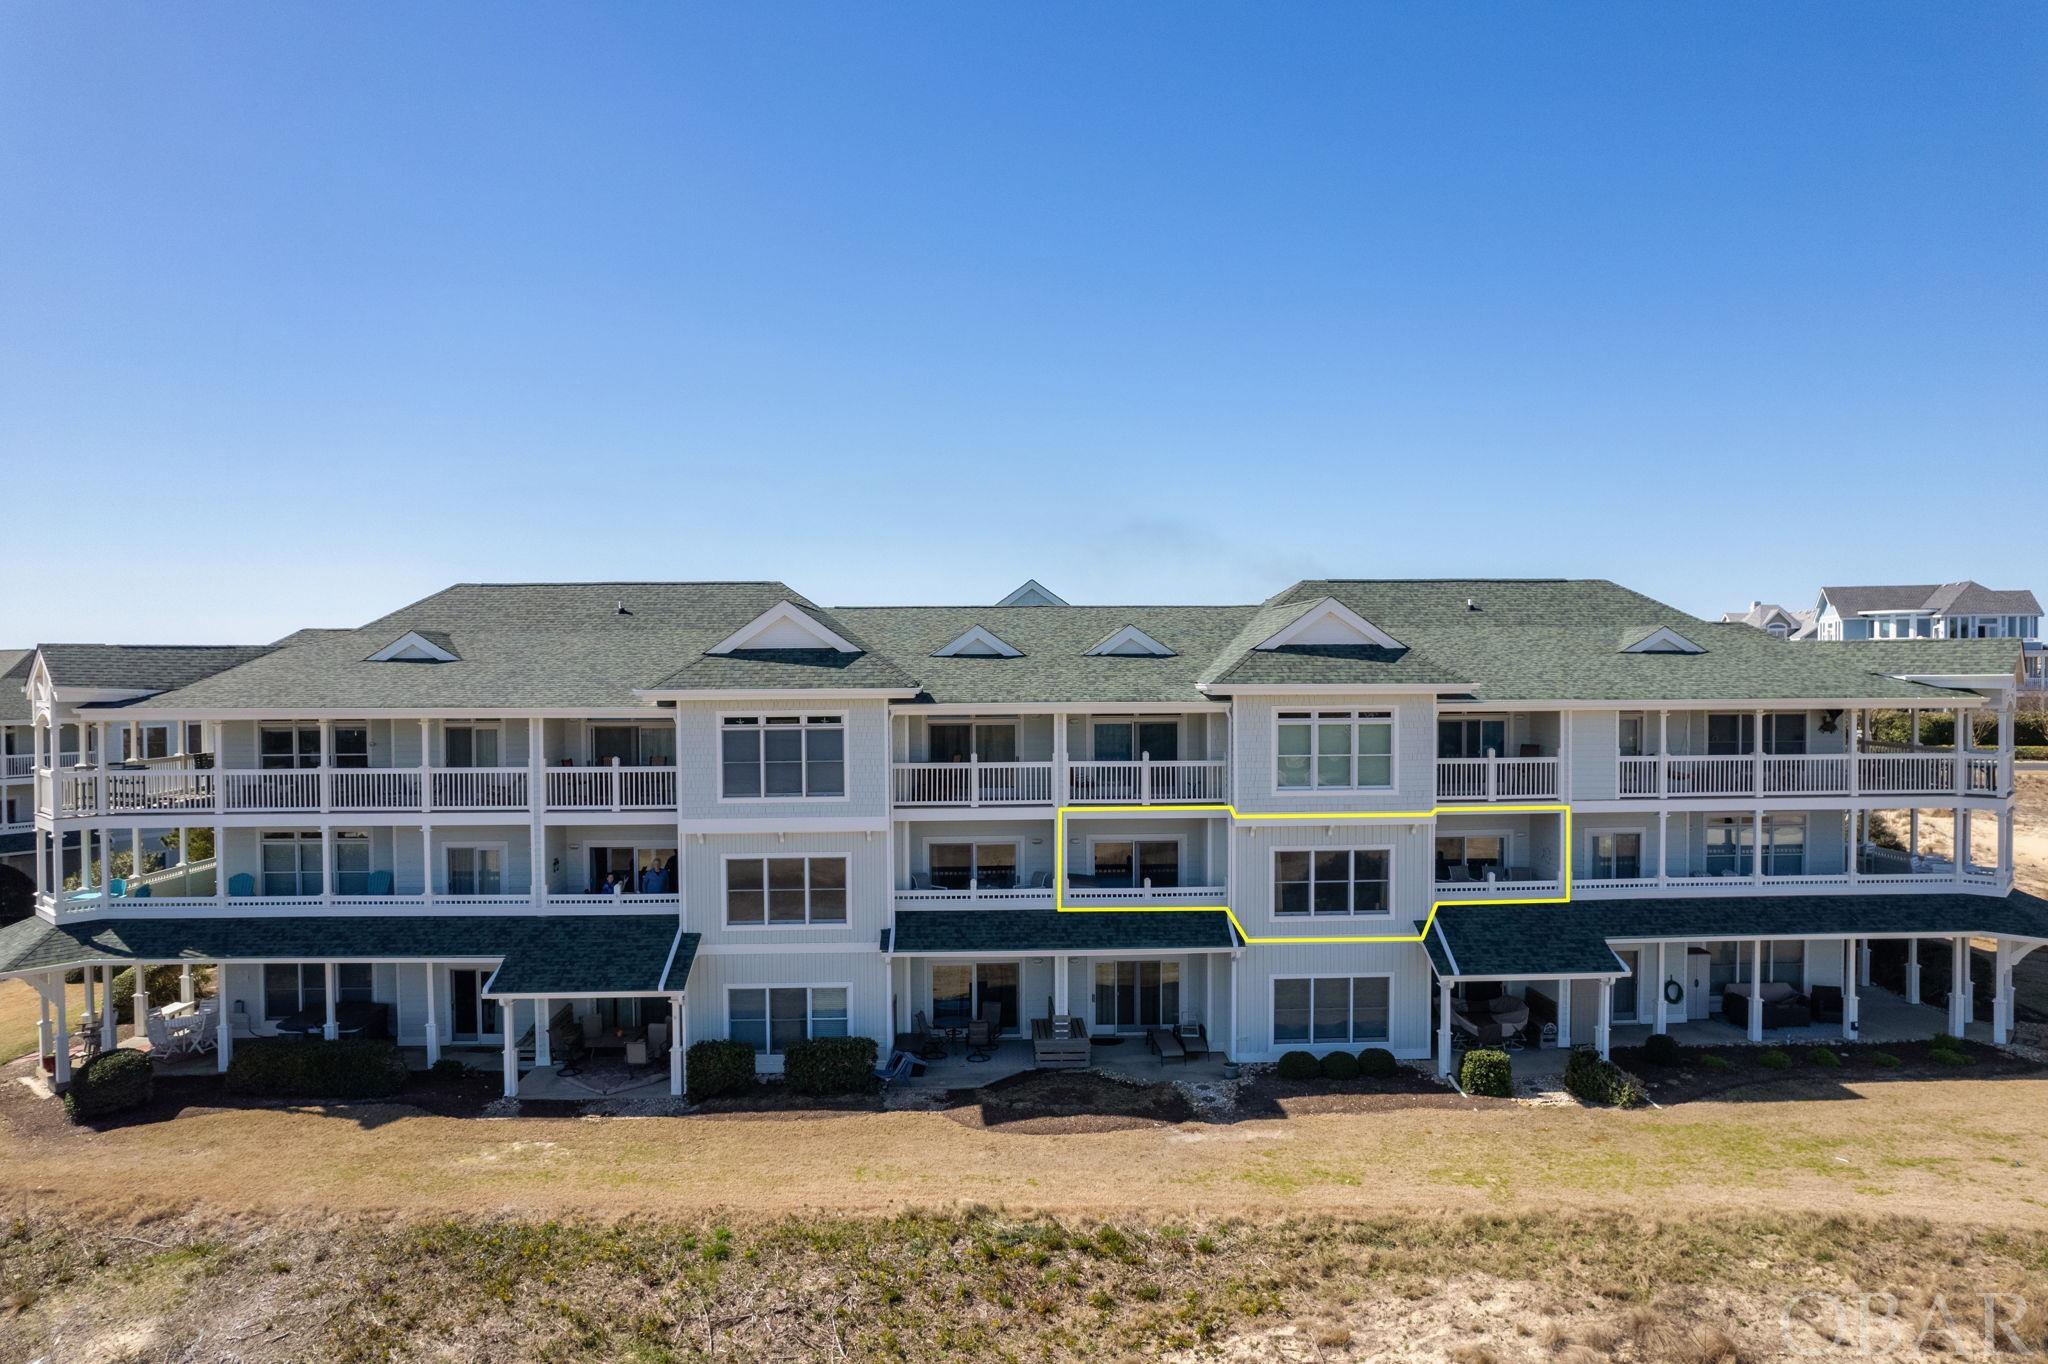 655 Sand and Sea Court, Corolla, NC 27927, 3 Bedrooms Bedrooms, ,3 BathroomsBathrooms,Residential,For sale,Sand and Sea Court,125045